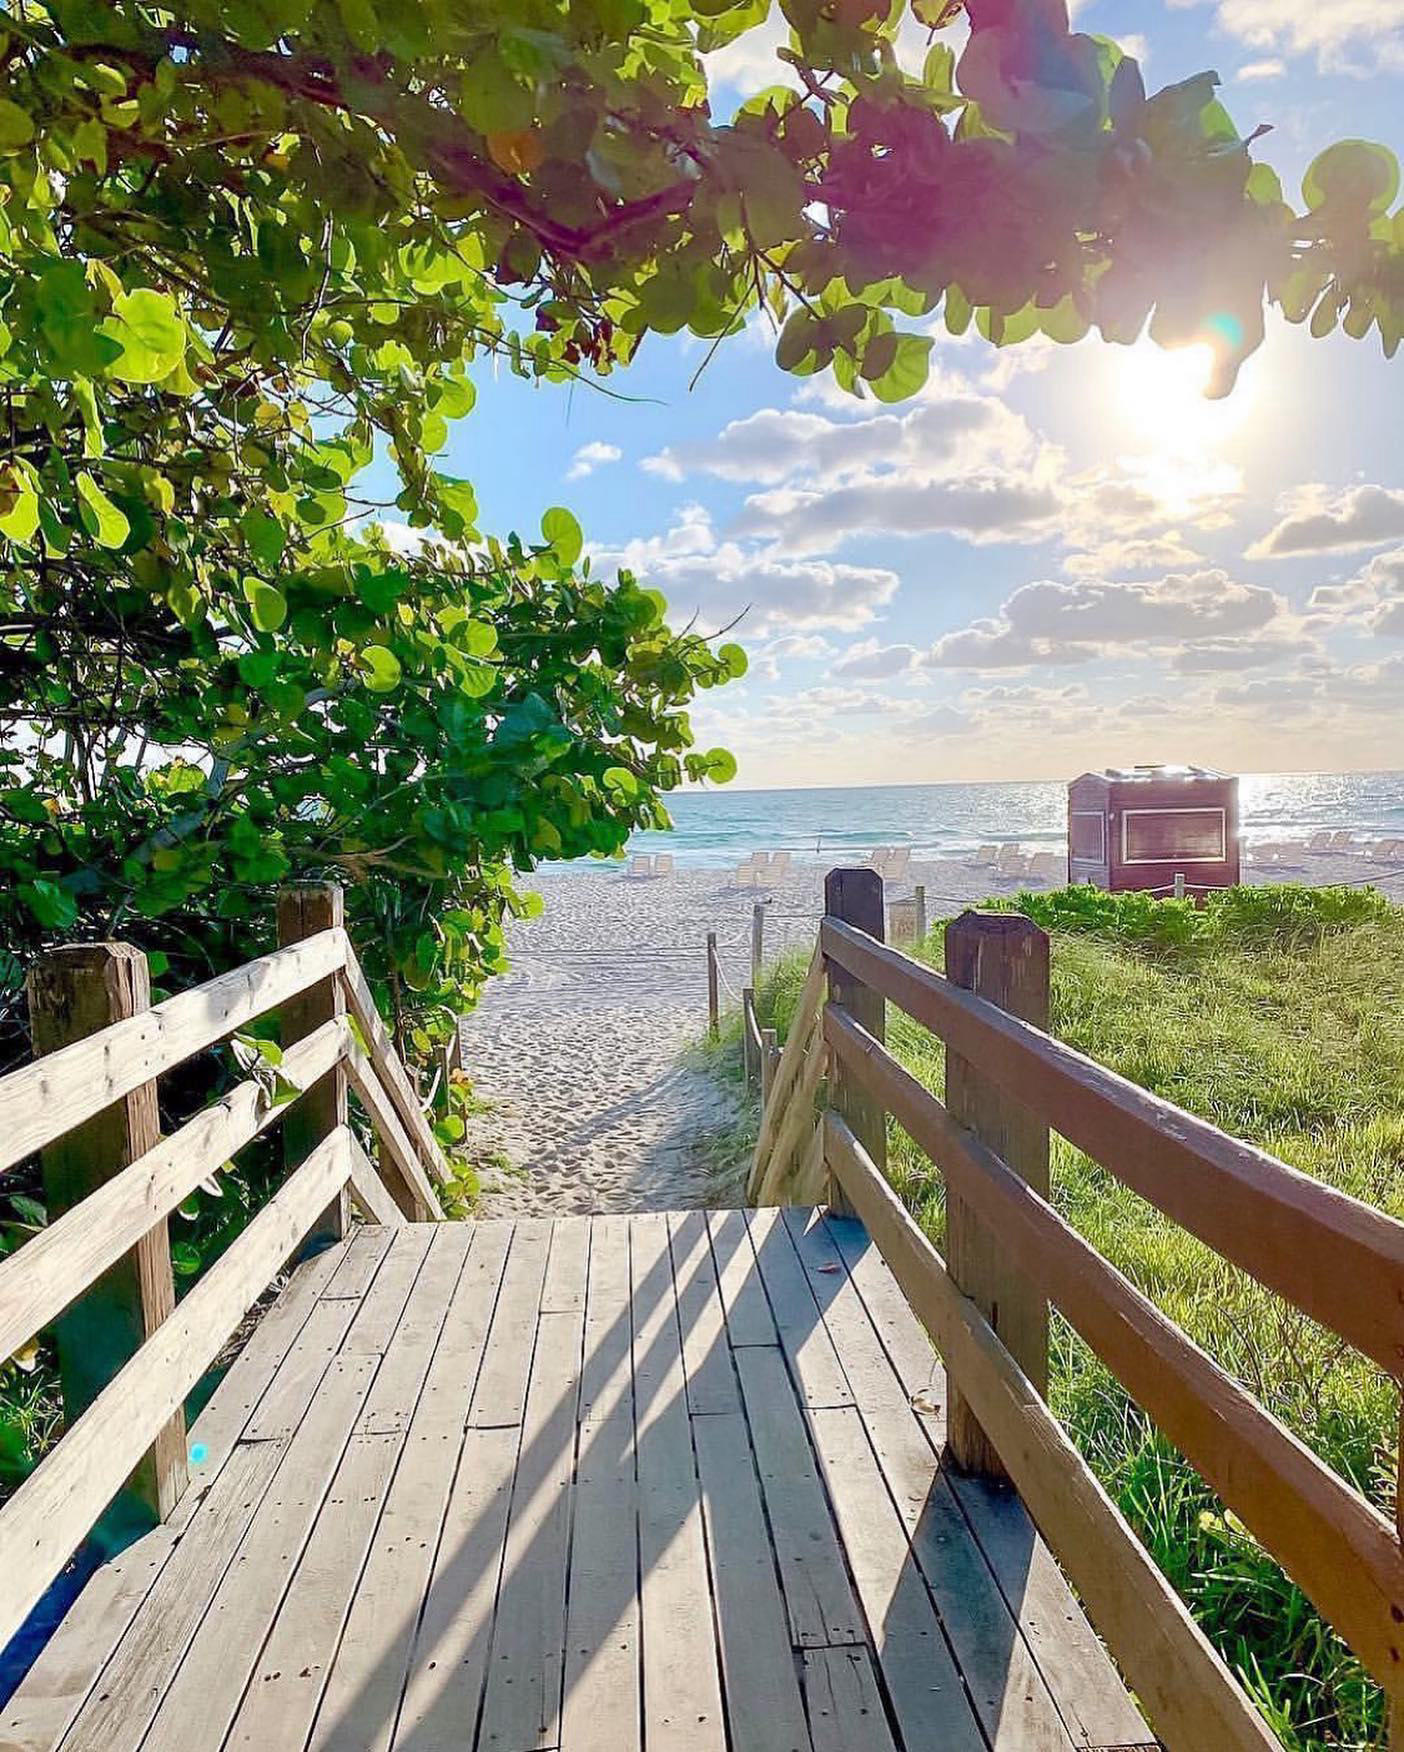 Miami Beach Life - Have a Great Monday Everyone